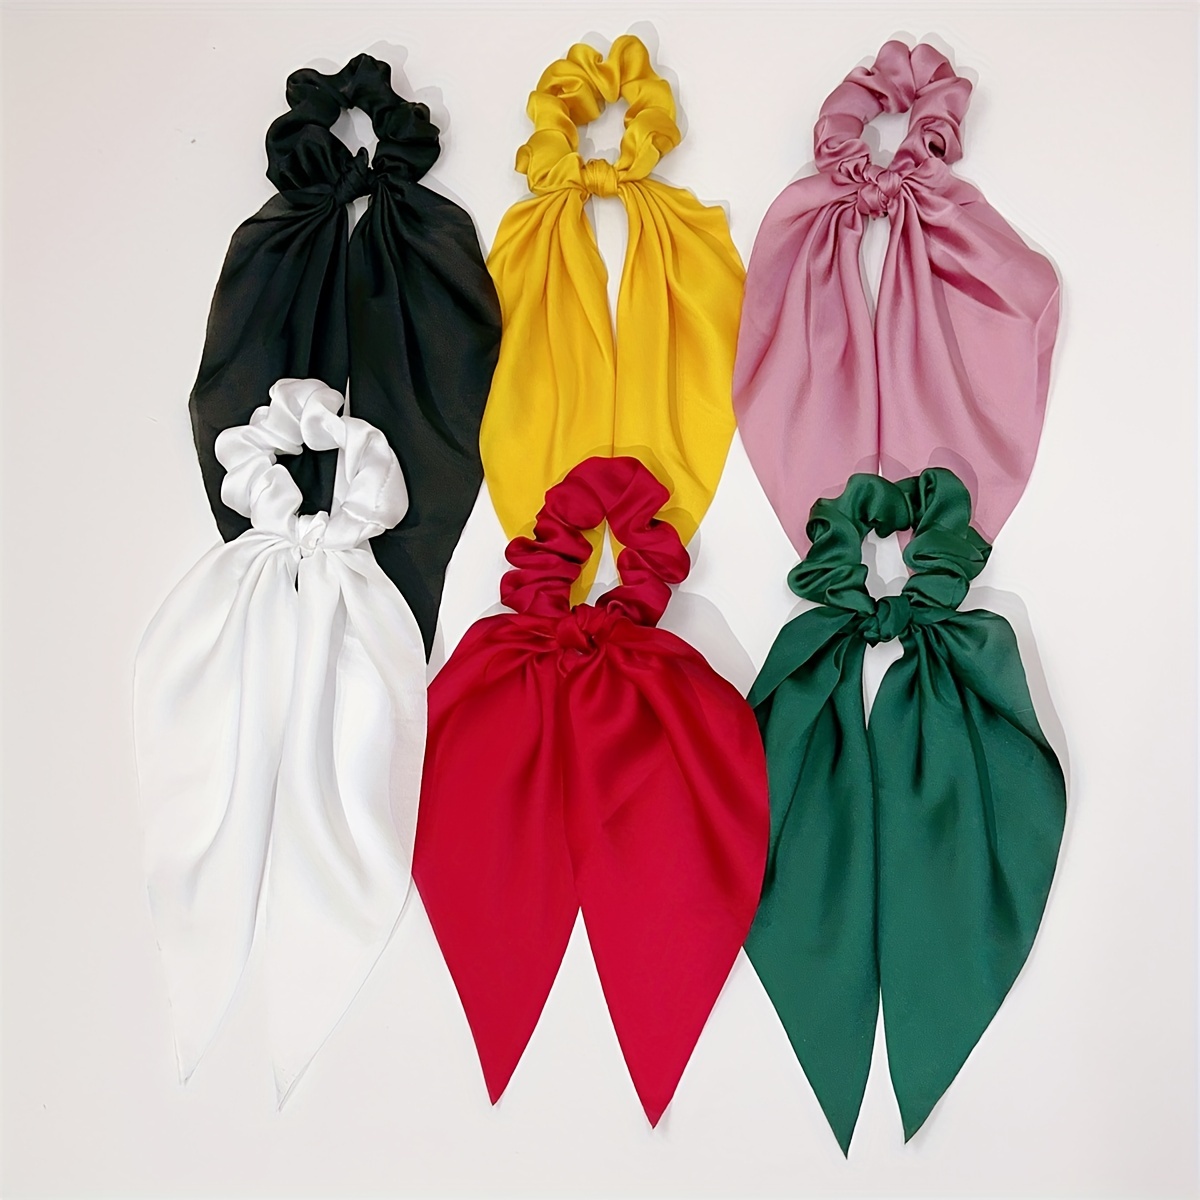 

6pcs Elegant Sweet Solid Color Satin Bow Hair Ties Set, Fabric Ribbon Ponytail Holders, Stretchy Scrunchies, Summer Simple Fashion Hair Accessories For Women